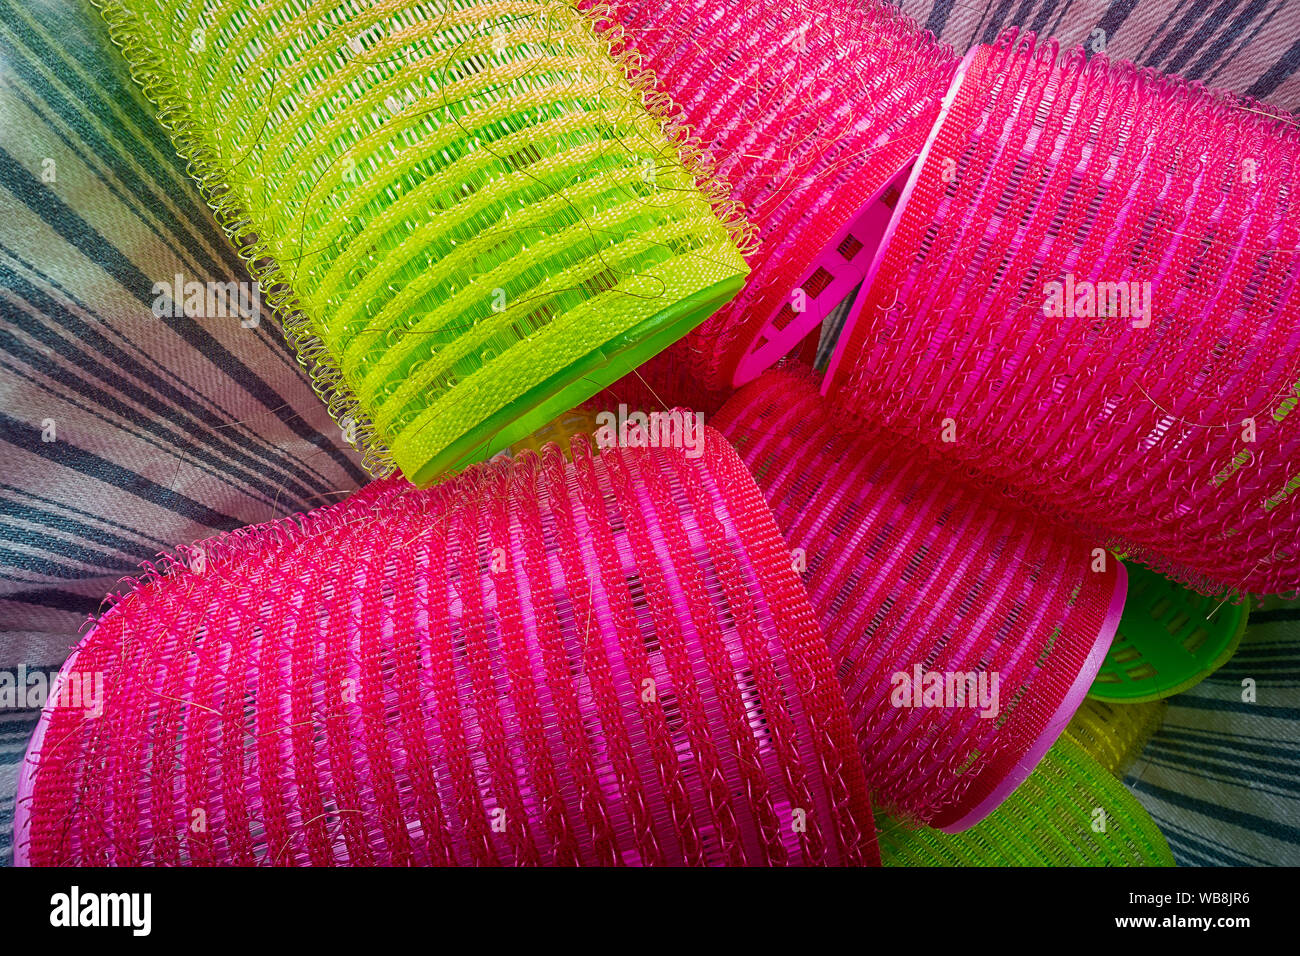 Pile of colorful hair curlers in basket Stock Photo